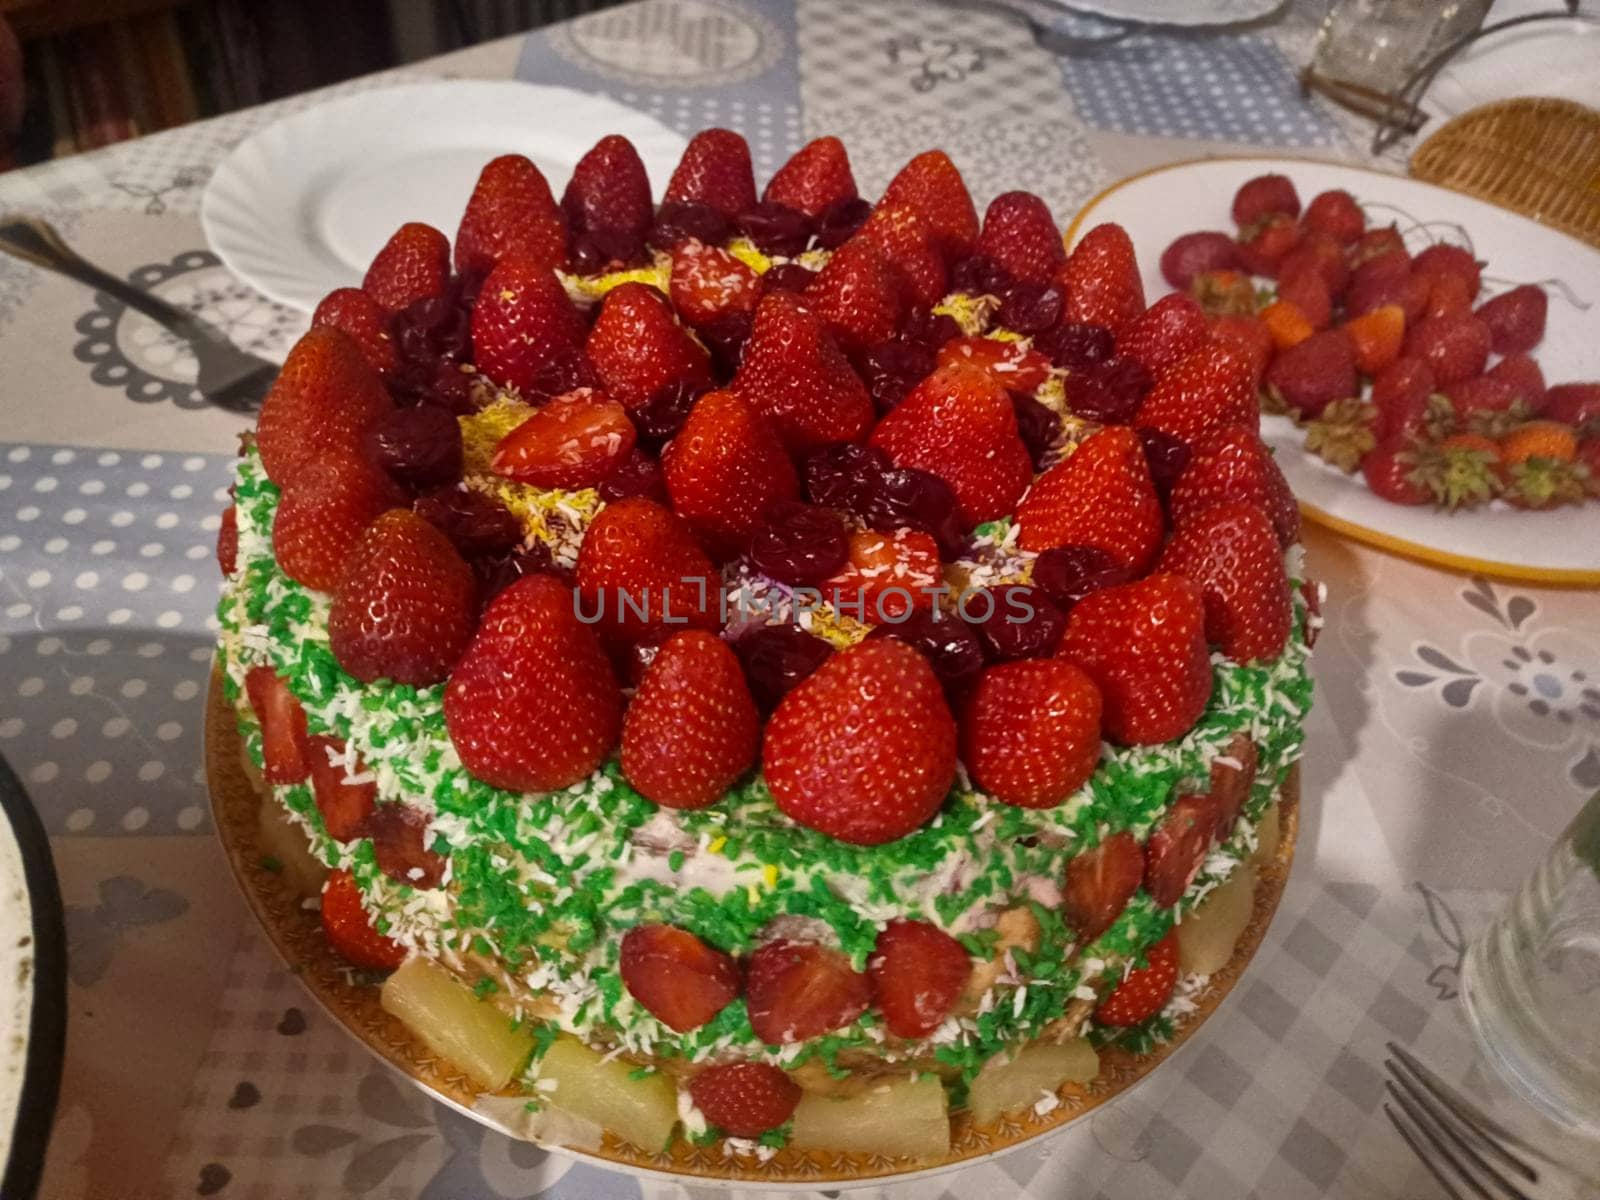 Delicious fruit cake with pineapples and strawberries.